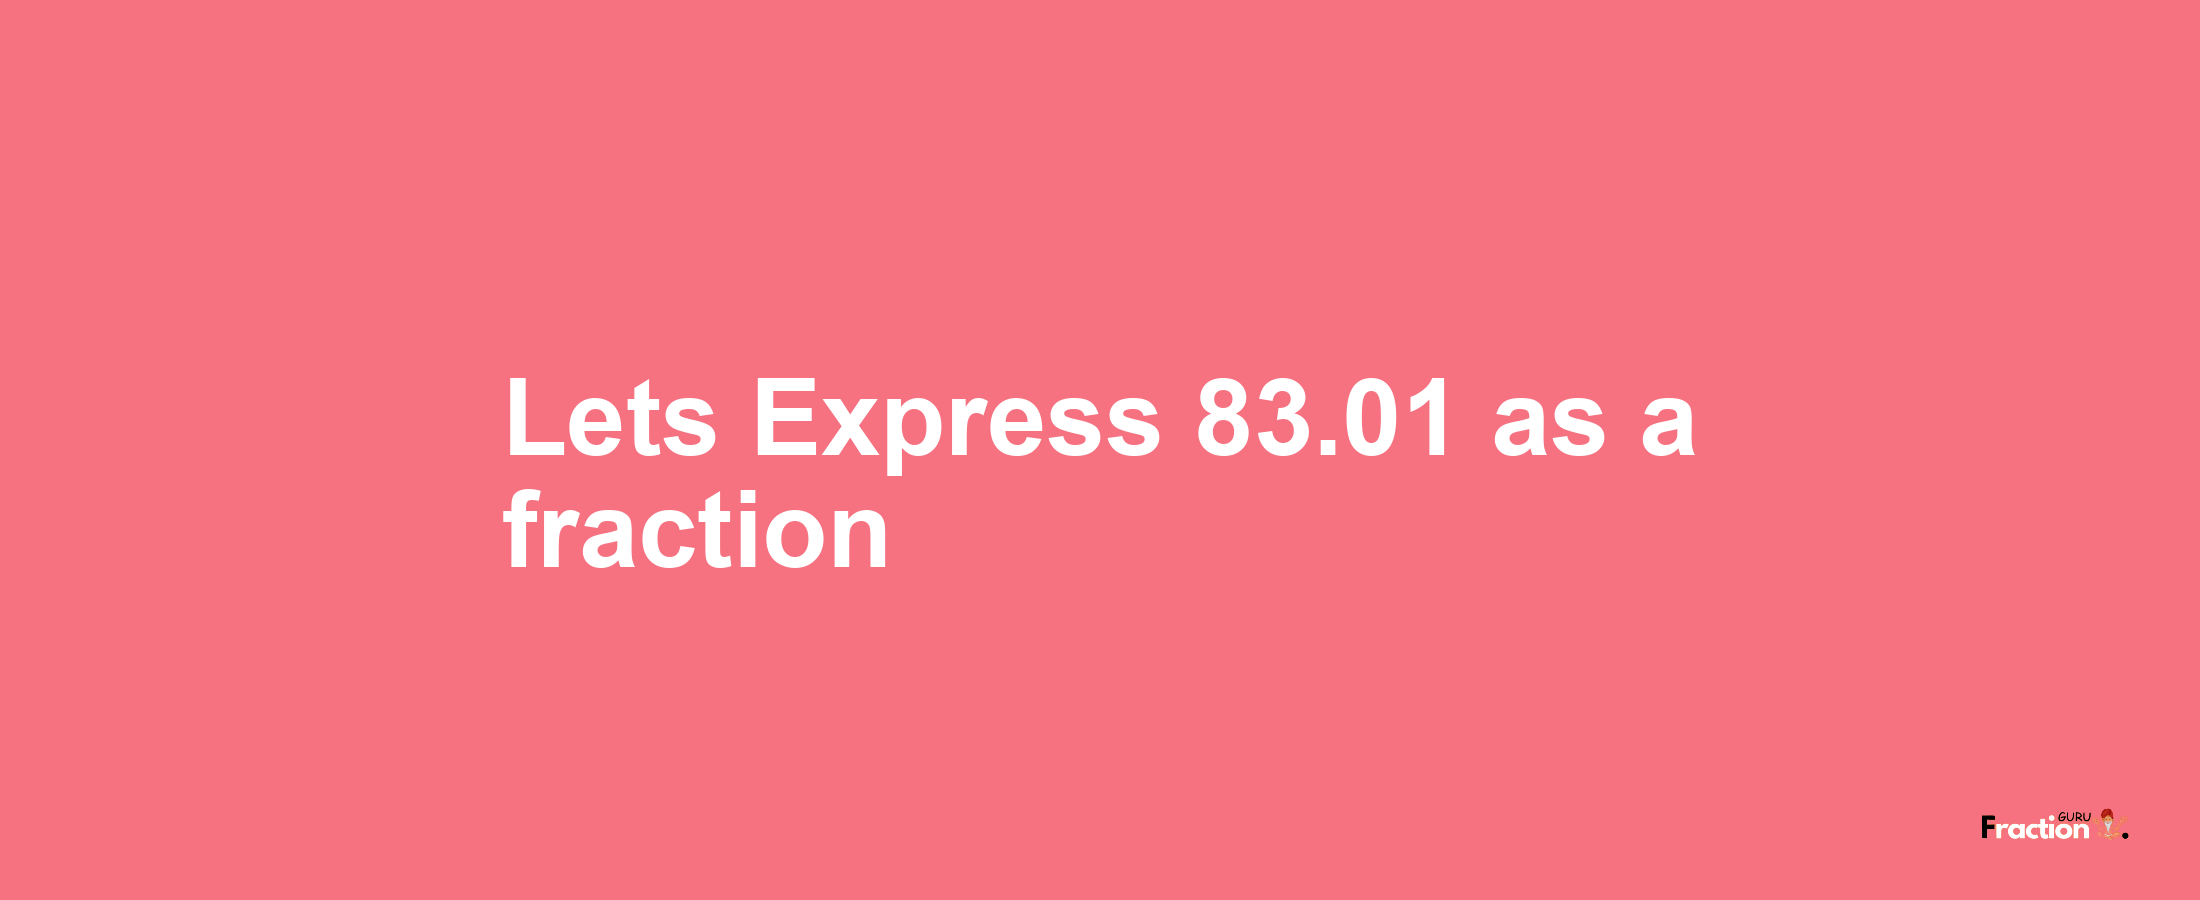 Lets Express 83.01 as afraction